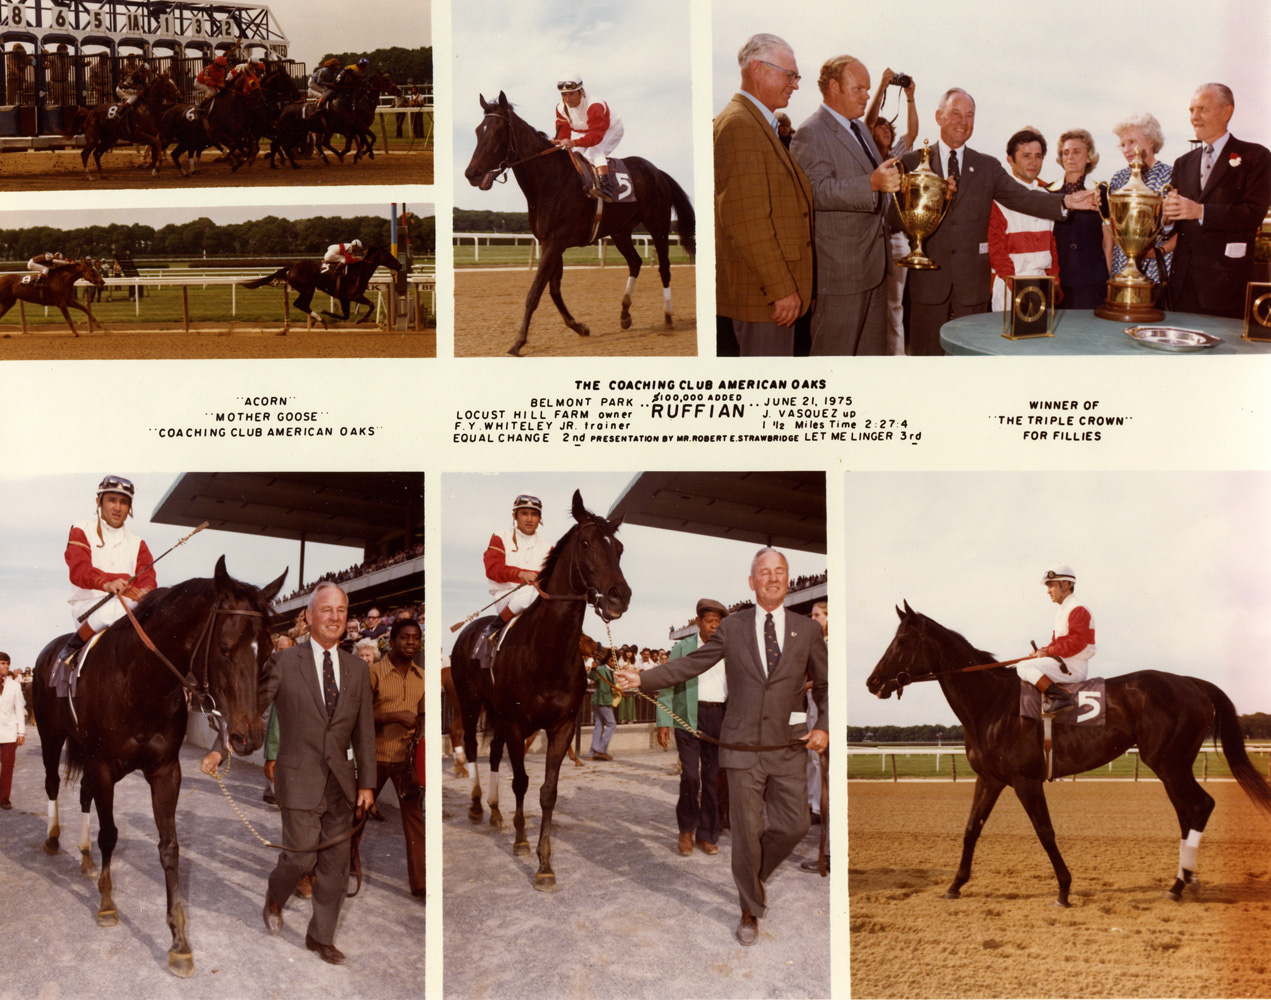 Win composite photograph for the 1975 Coaching Club American Oaks, won by Ruffian with Jacinto Vasquez up (NYRA/Museum Collection)